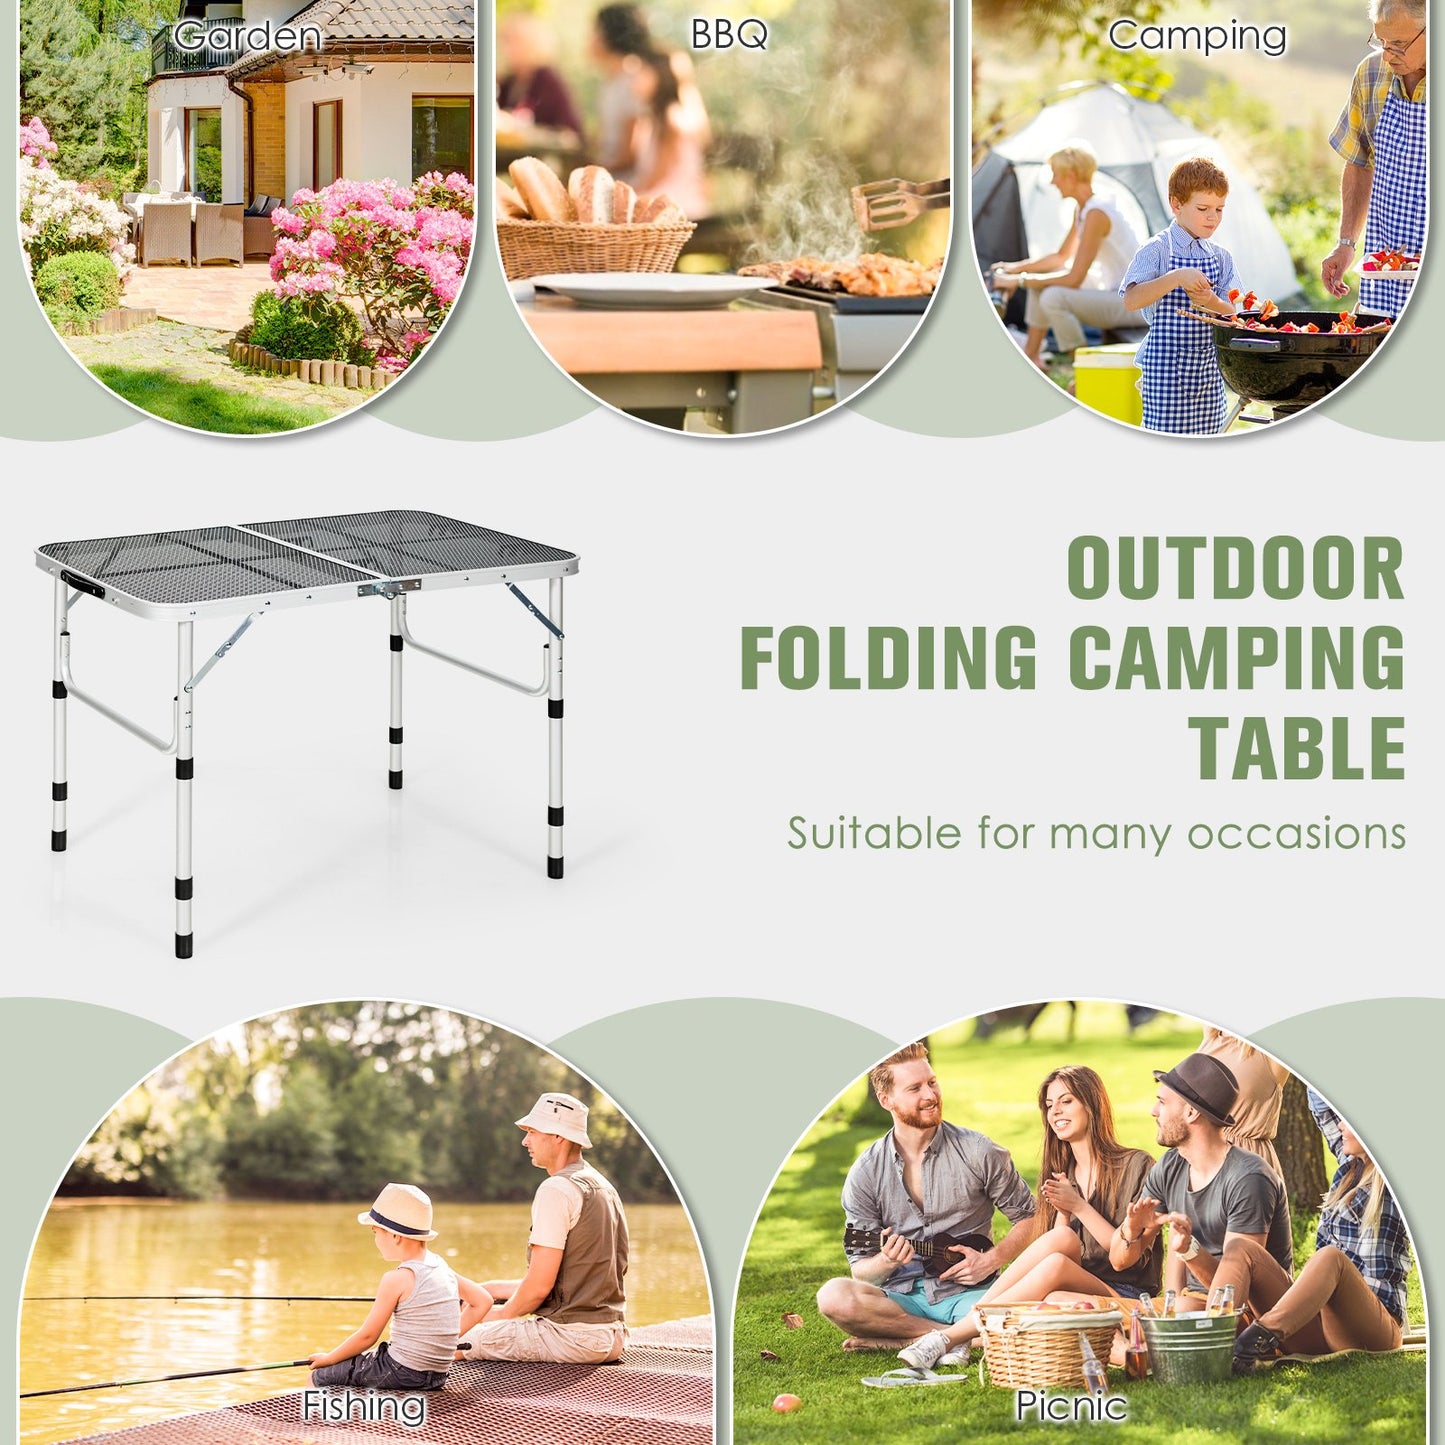 Folding Grill Table for Camping Lightweight Aluminum Metal Grill Stand Table, Silver